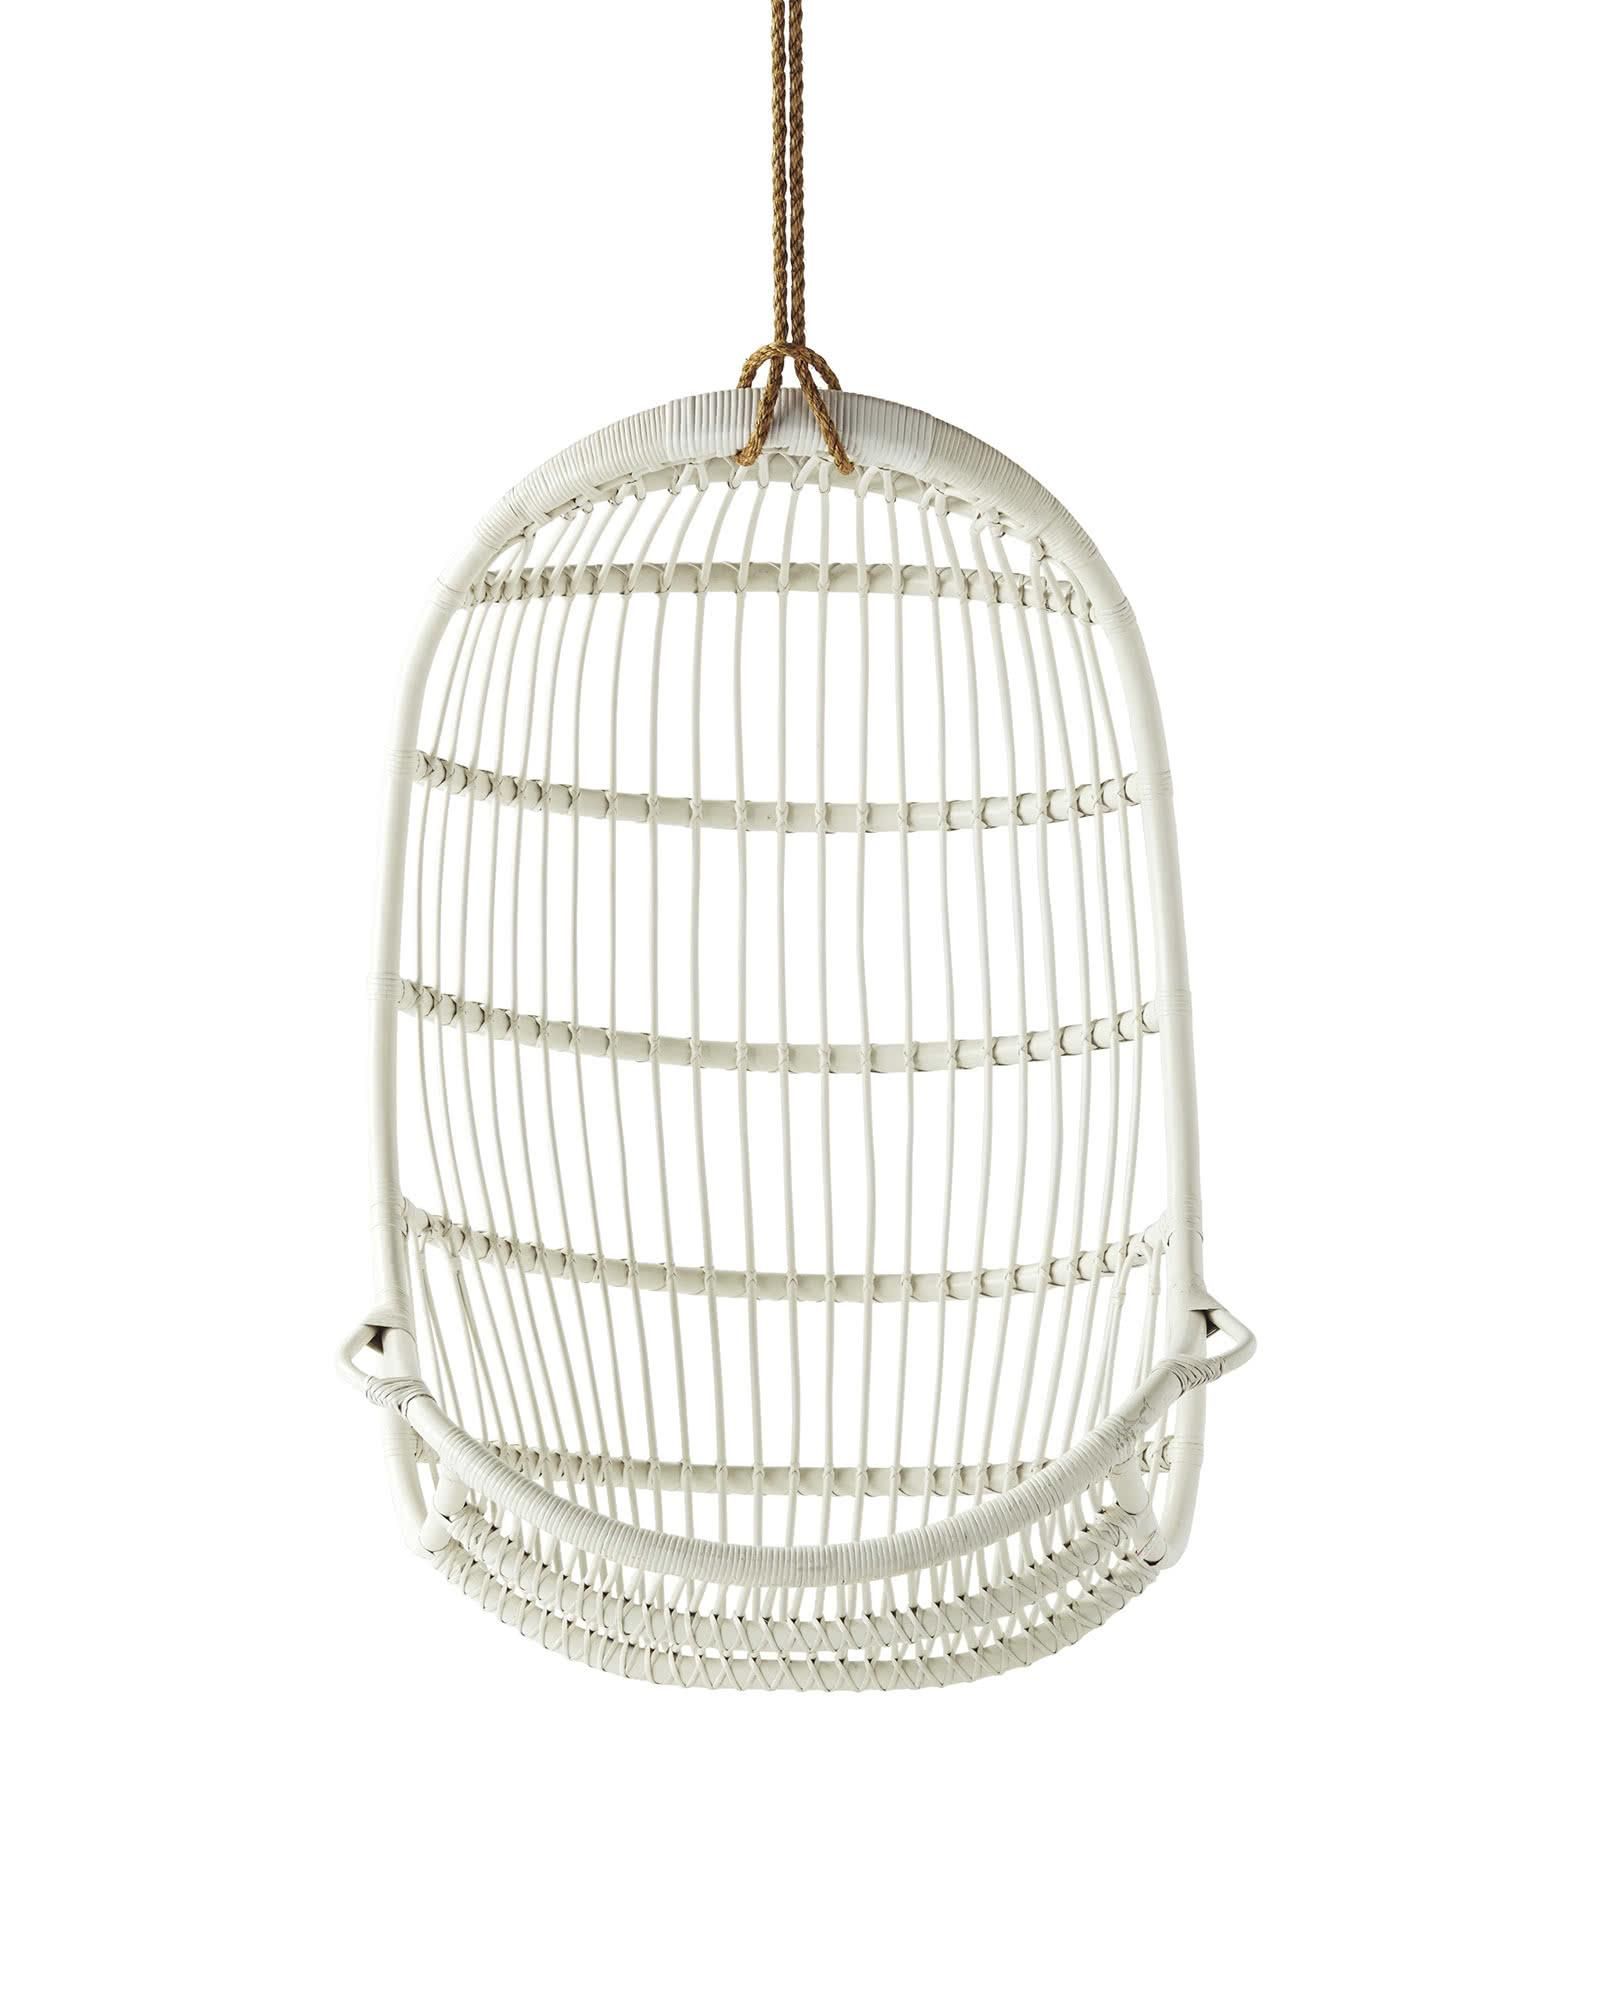 Hanging Rattan Chair | Serena and Lily